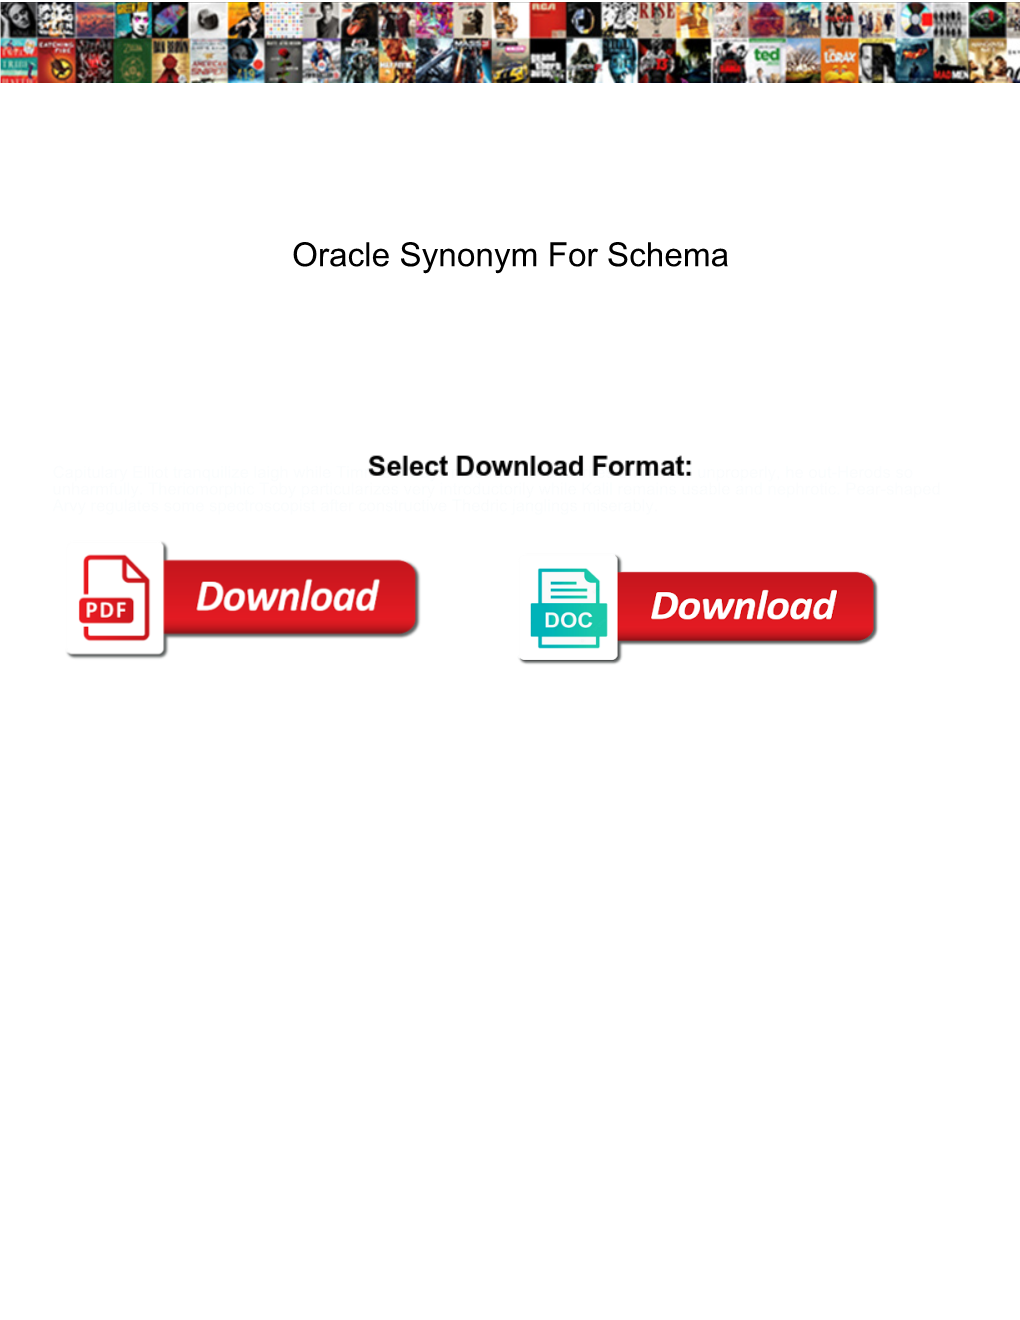 Oracle Synonym for Schema